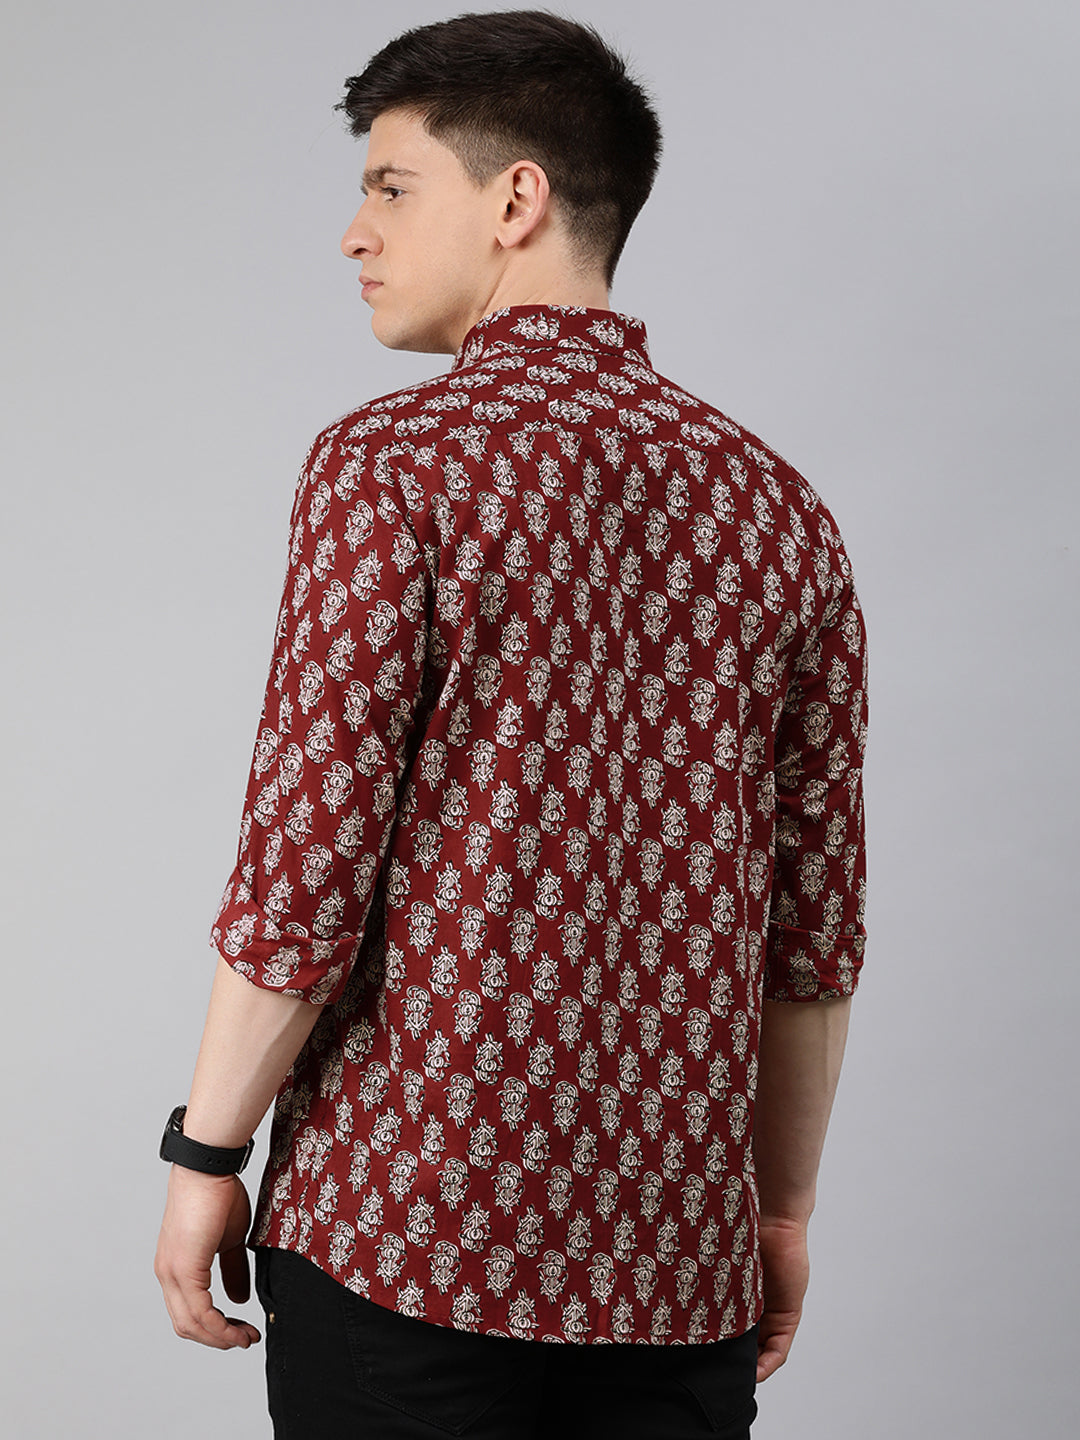 Maroon Cotton Full Sleeves Shirts For Men-MMF0204 - NOZ2TOZ